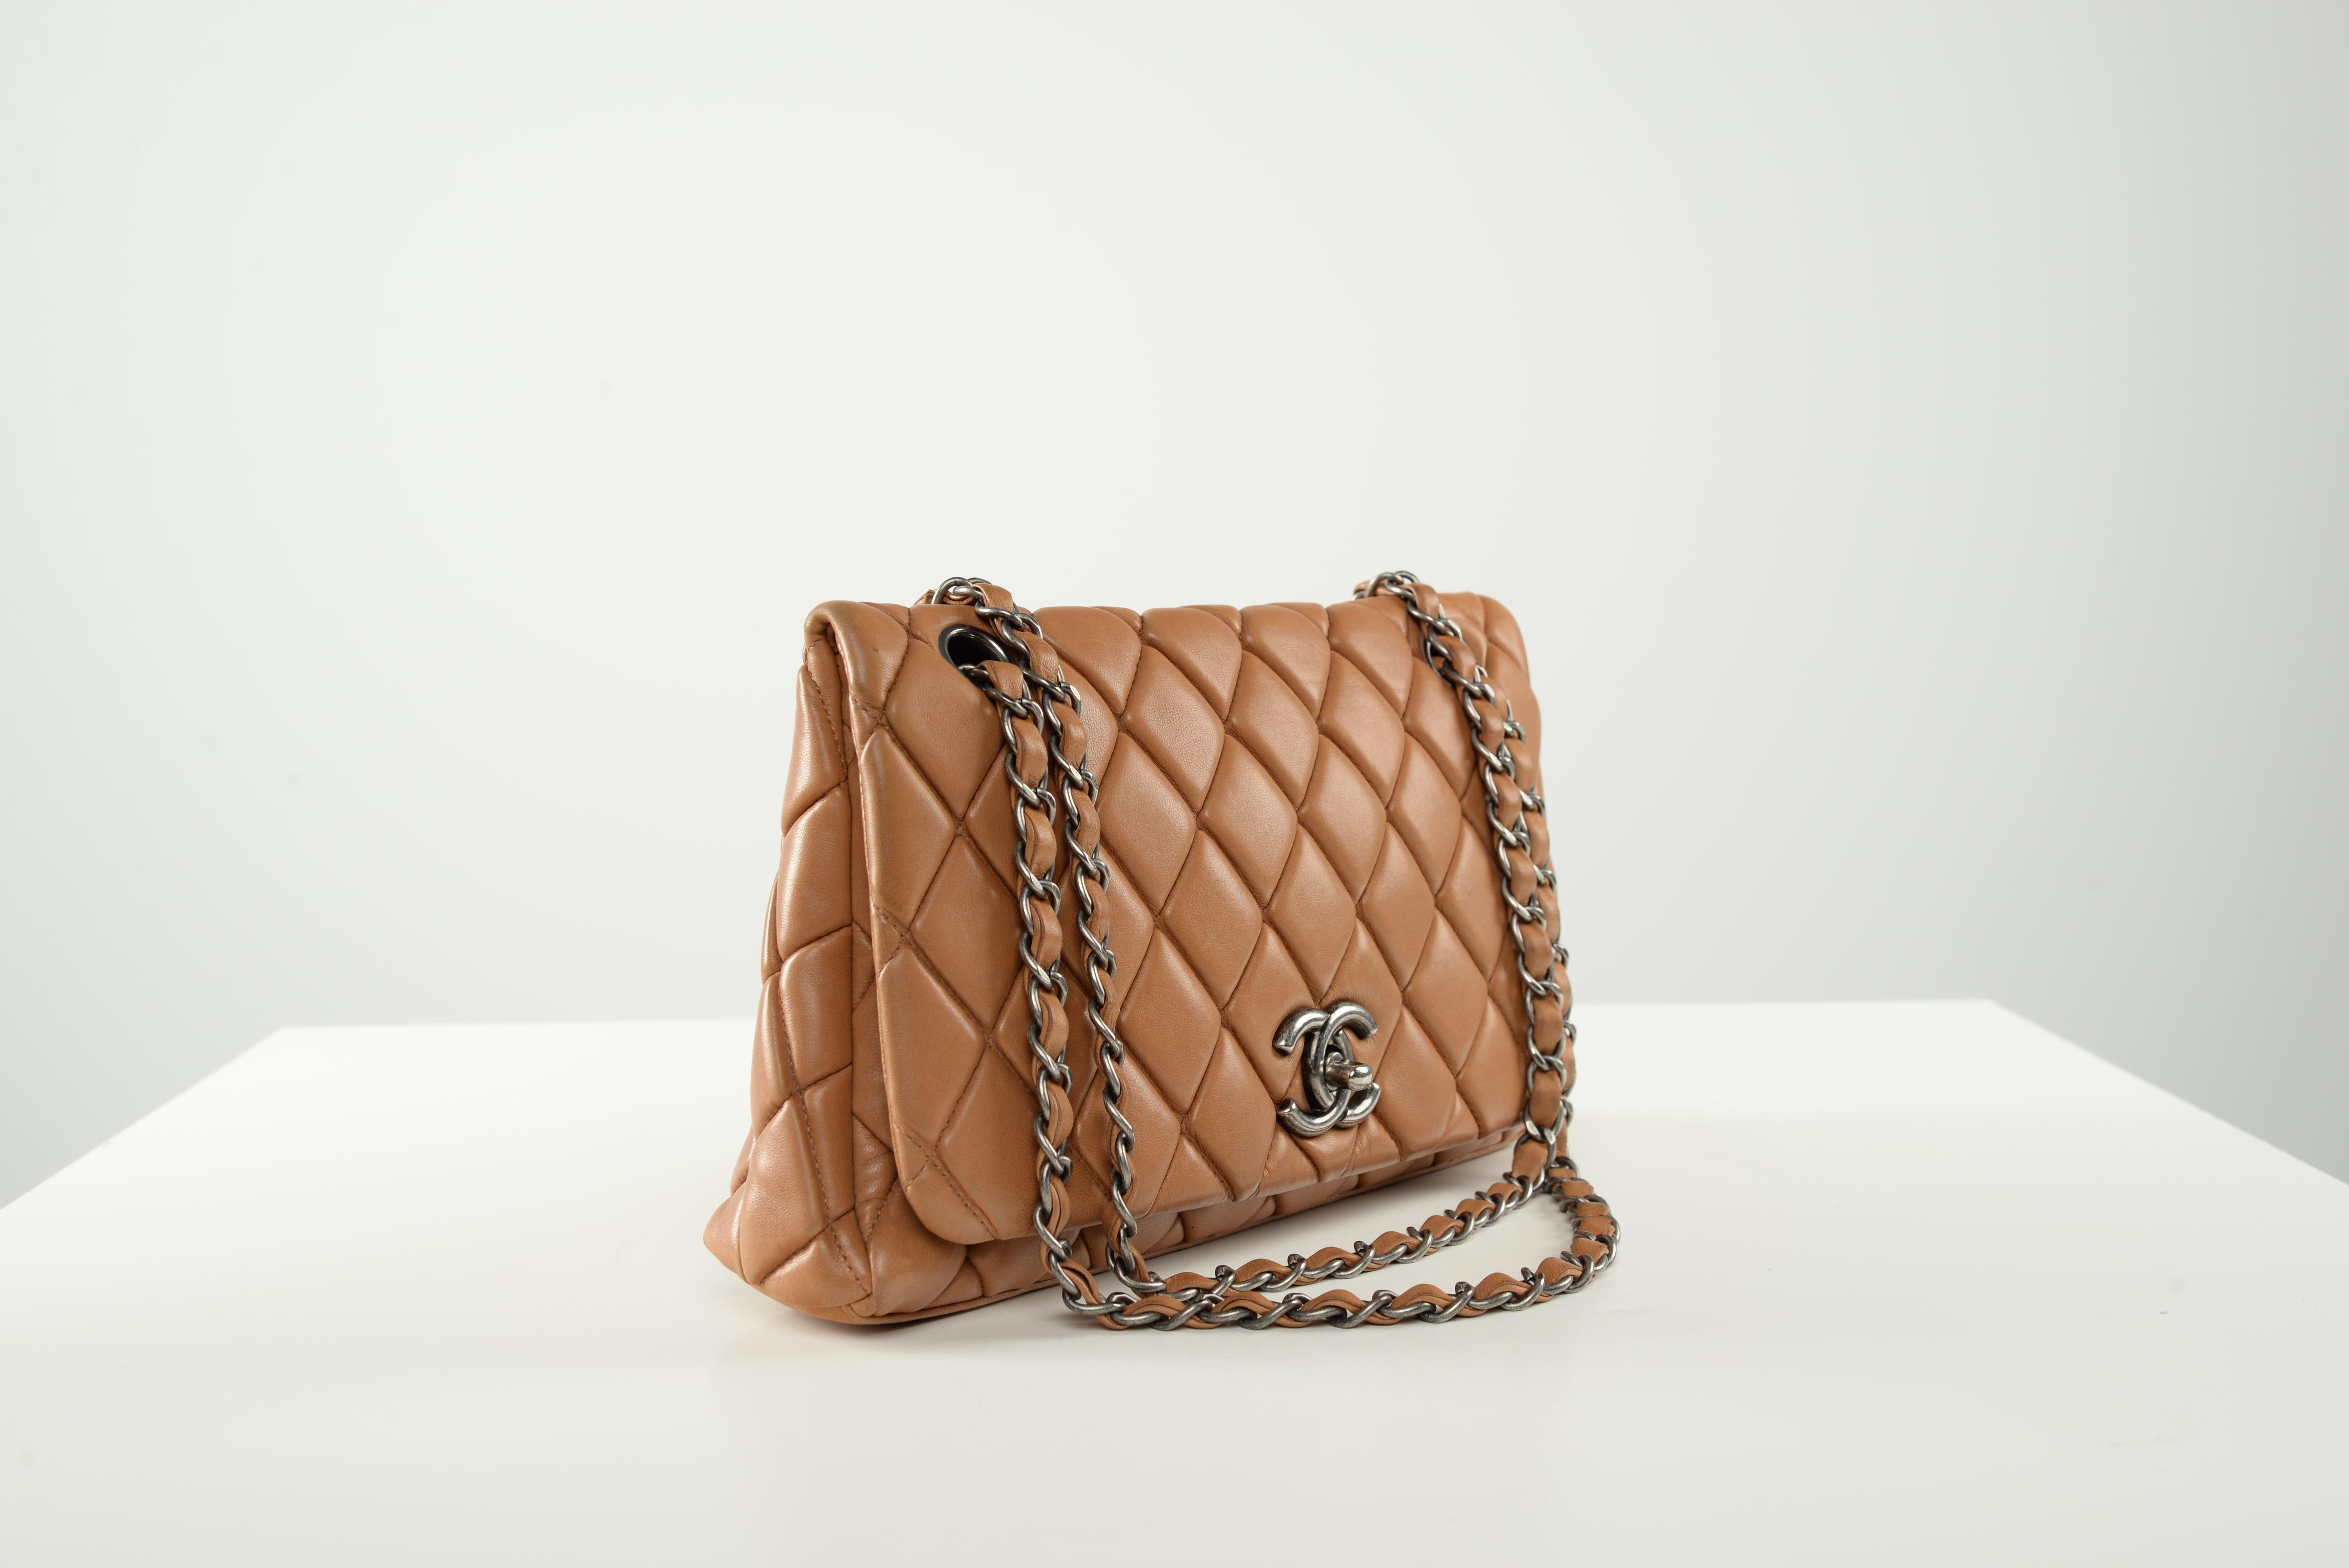 Chanel Quilted Single Flap Karl Lagerfeld Lambskin Bag 5